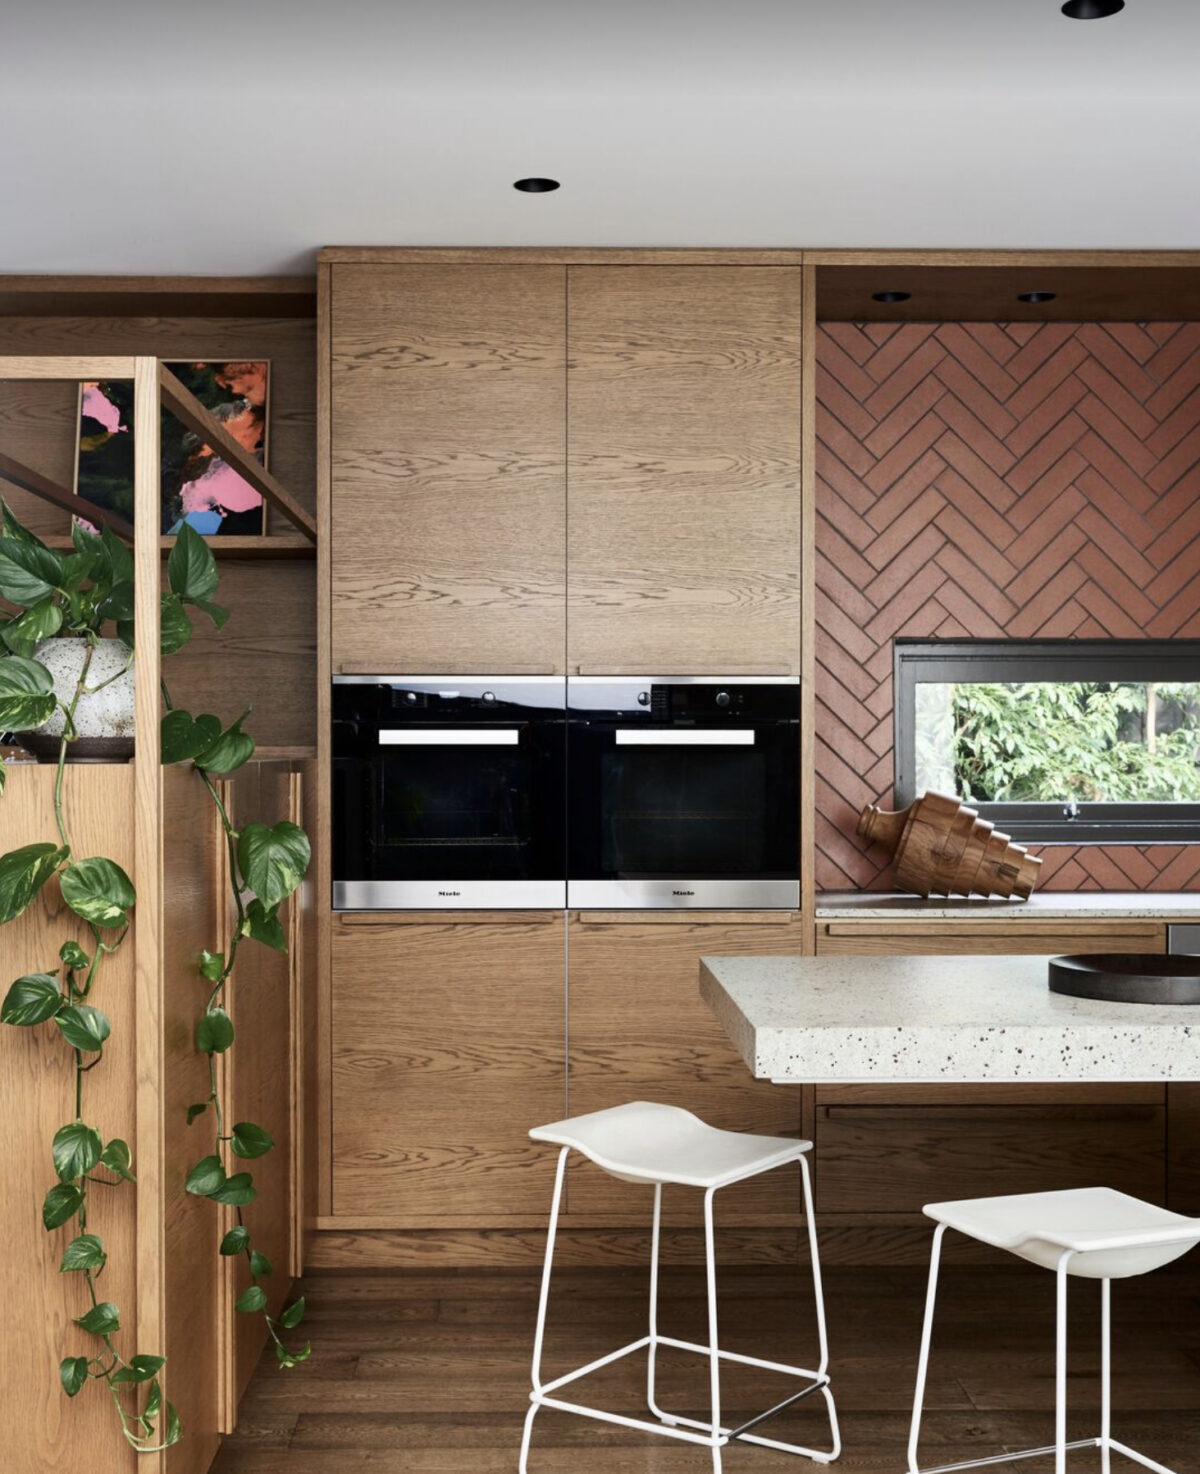 New Life Breathes into this Australian Midcentury Home - Mid Century Home